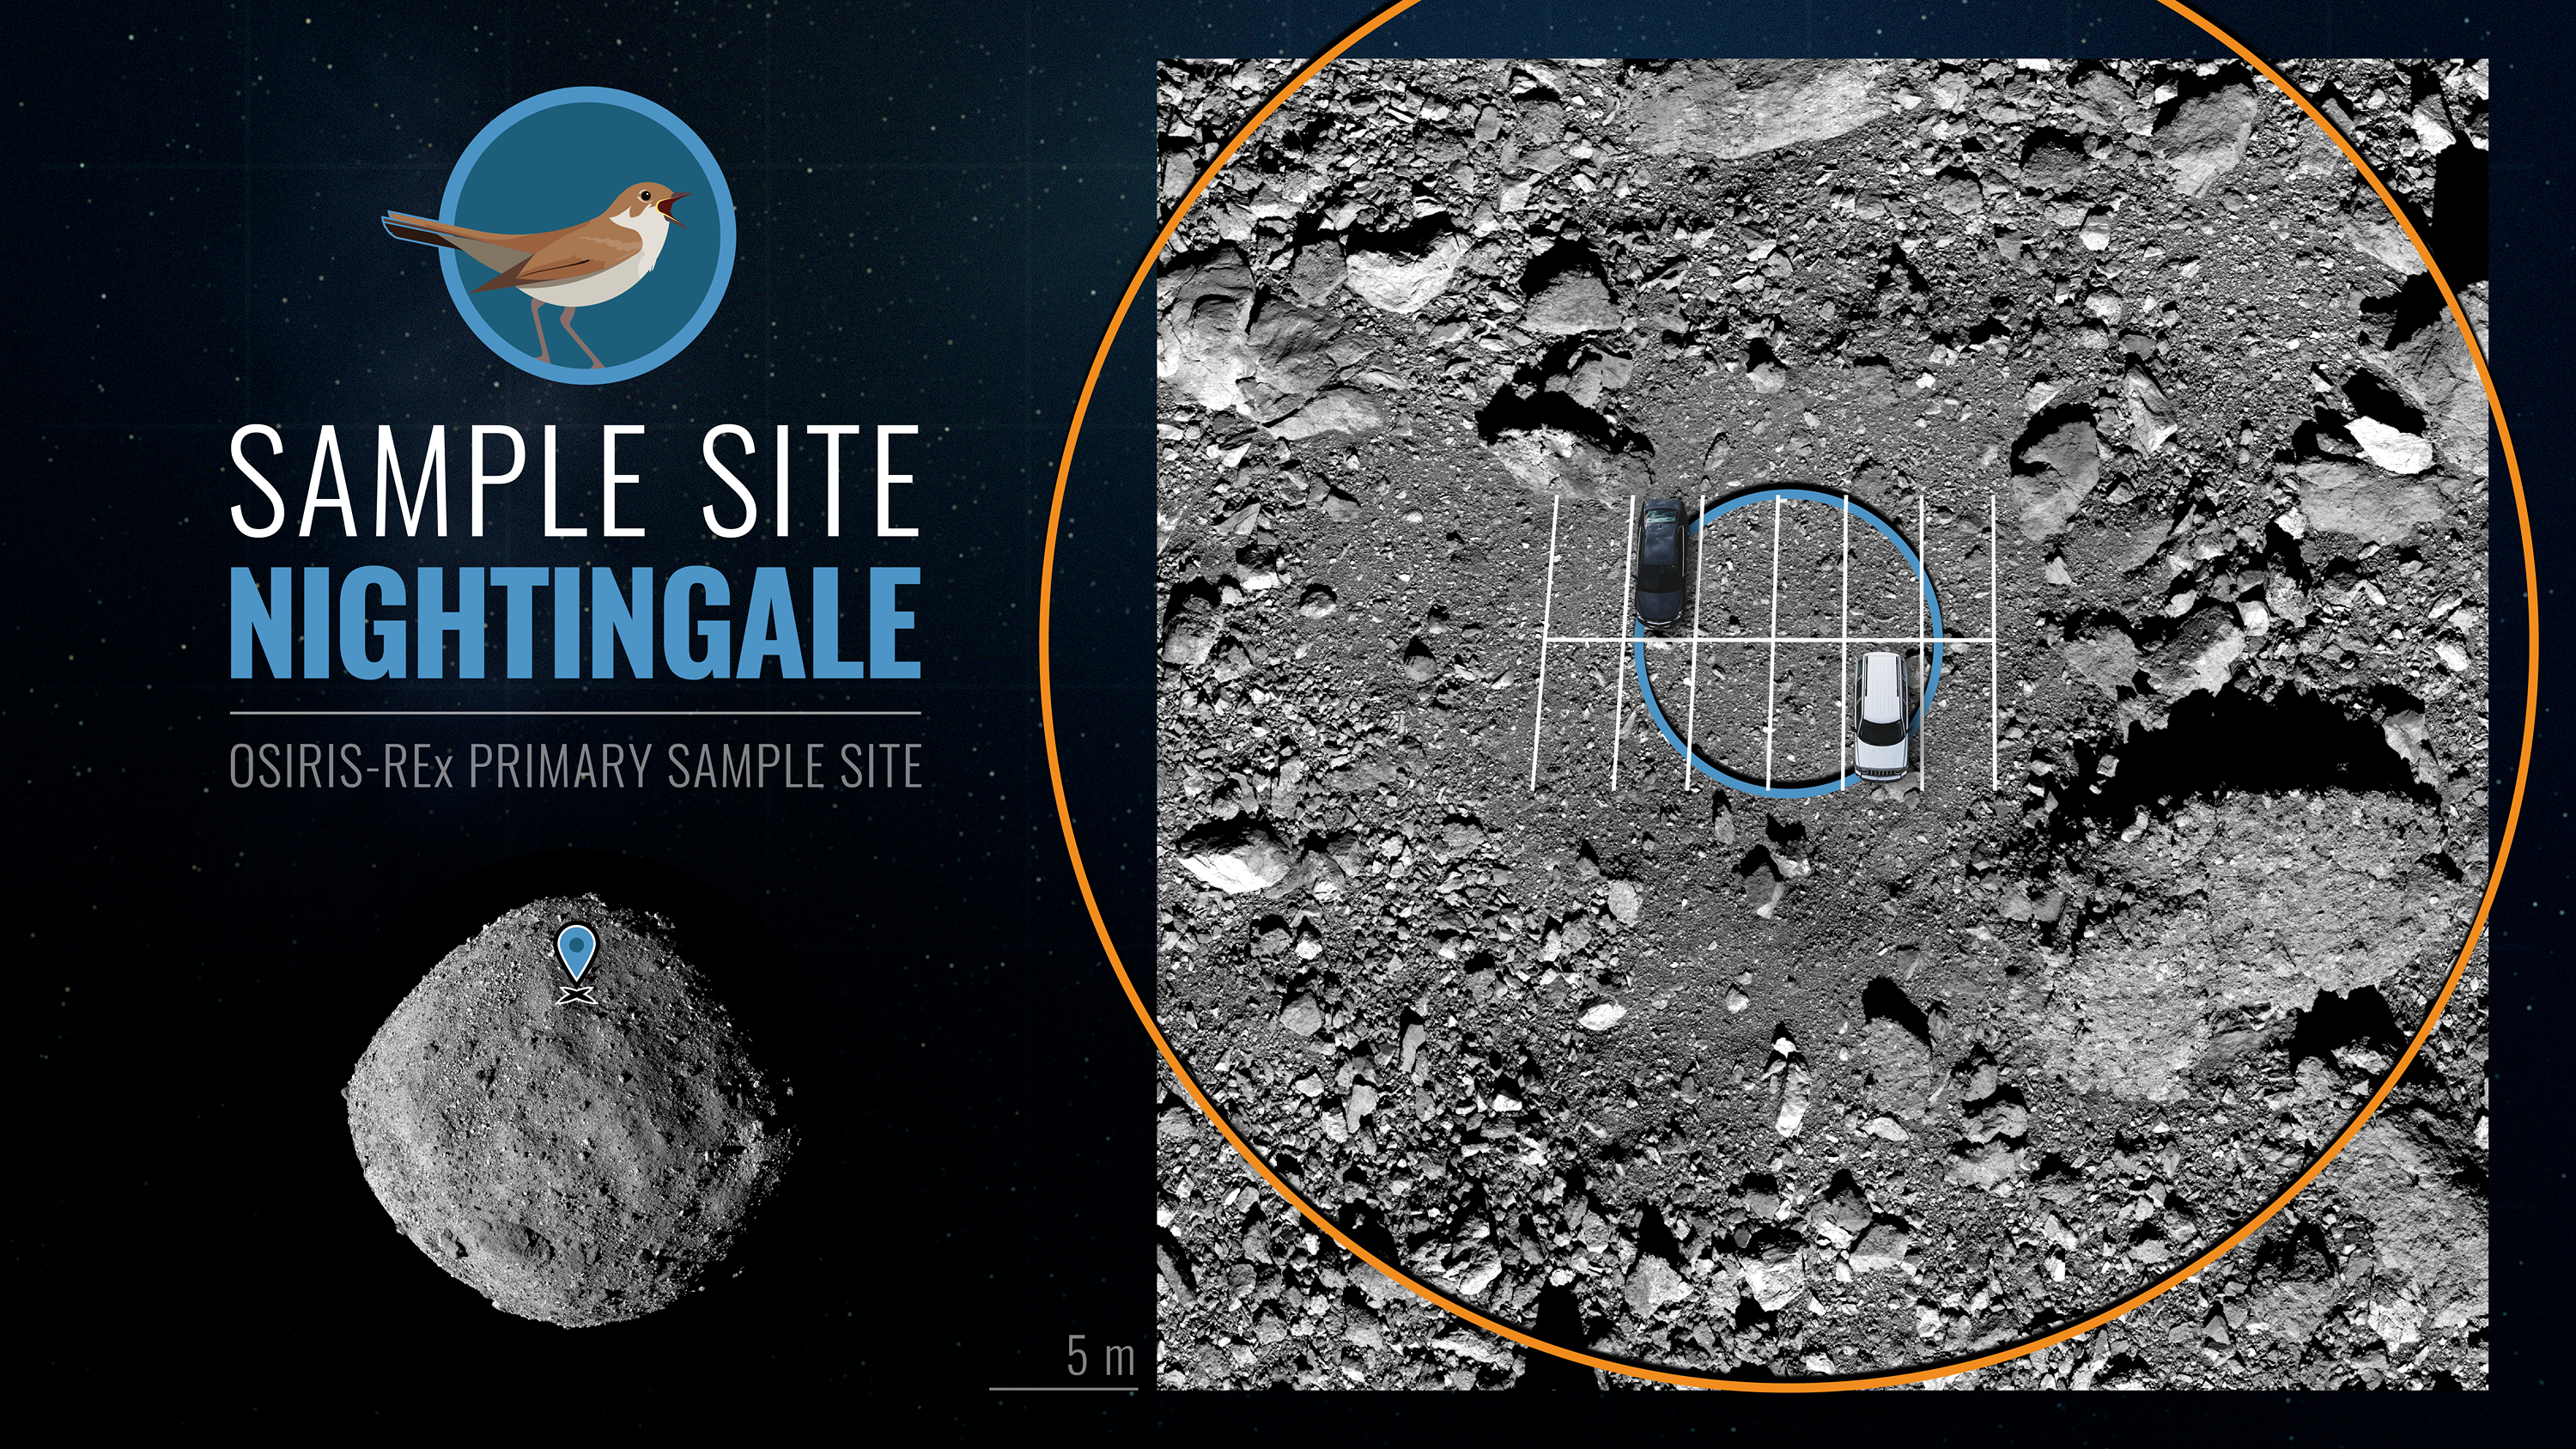 at right is a circle of a gray dusty area on an asteroid, showing a ruler and a car for scale. at left are the words 